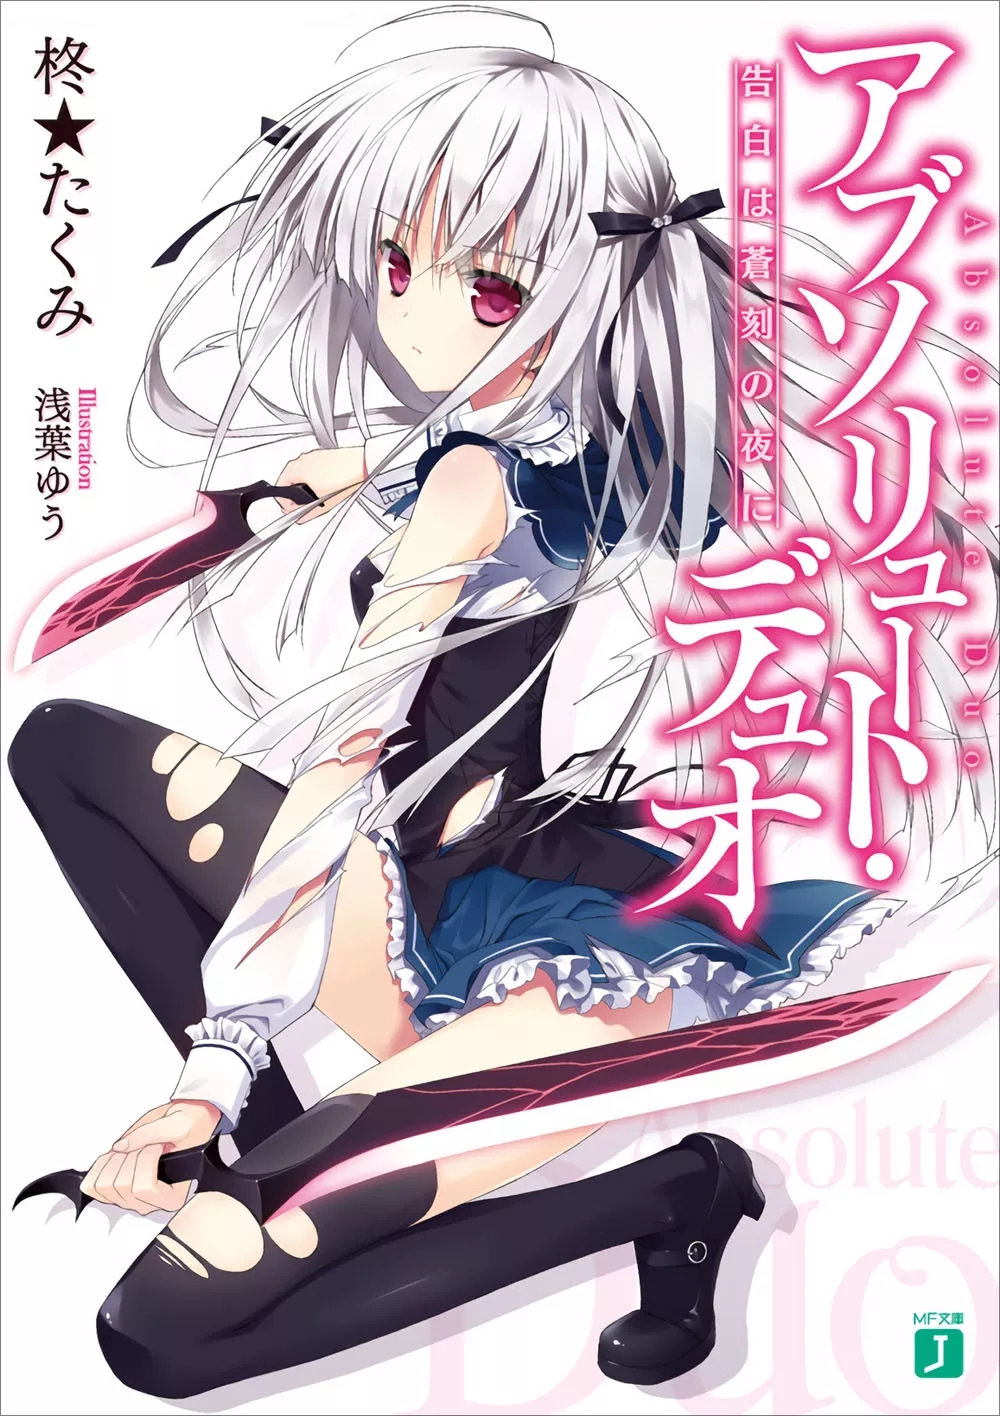 Absolute Duo OST - Animes-Mangas-DDL.com